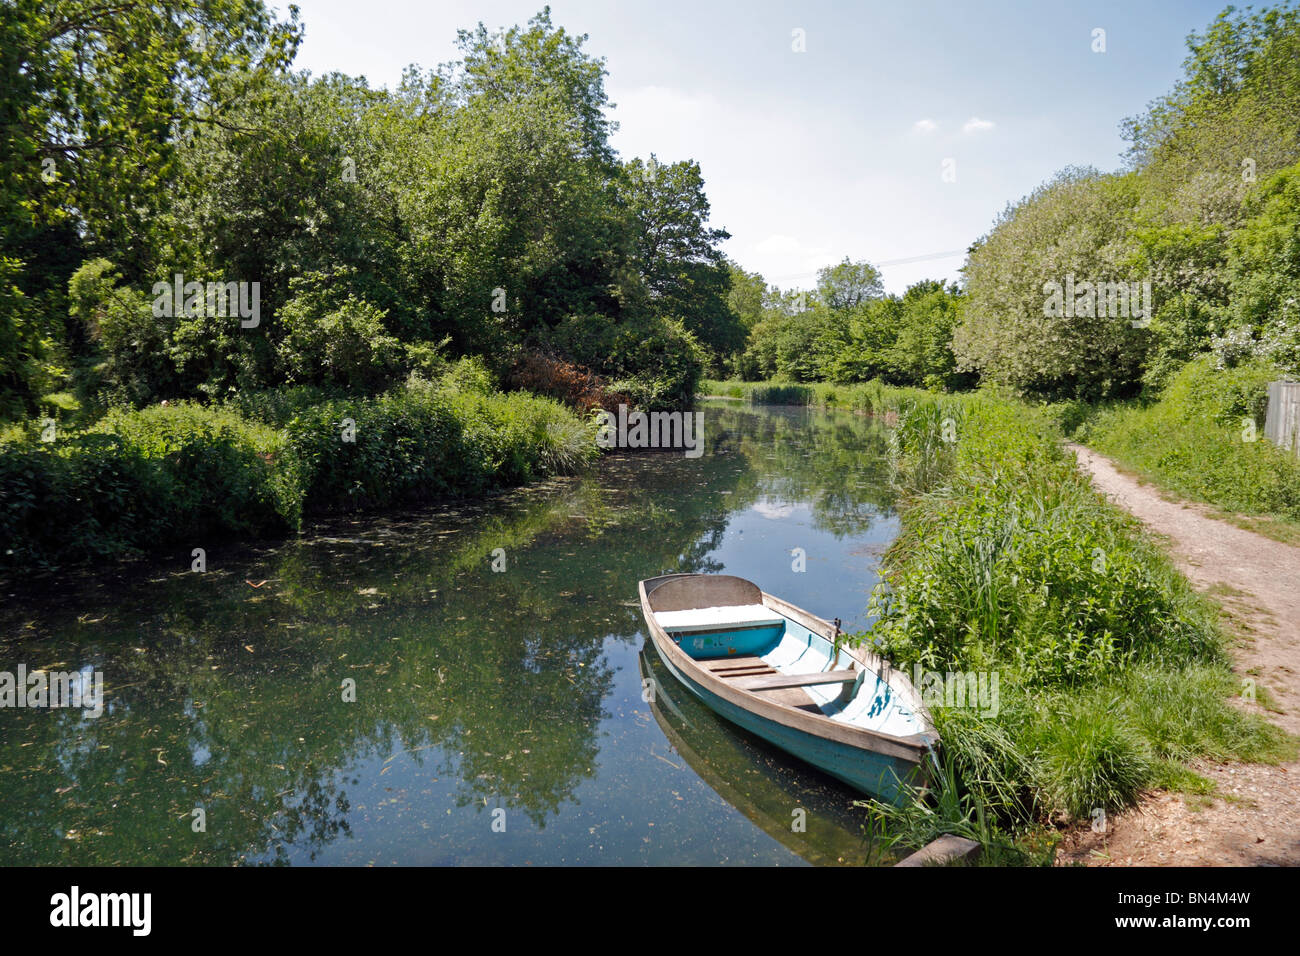 Rowing boat sitting on the Basingstoke Canal near the ruins of Odiham Castle, Hampshire, UK. Jun 2010 Stock Photo